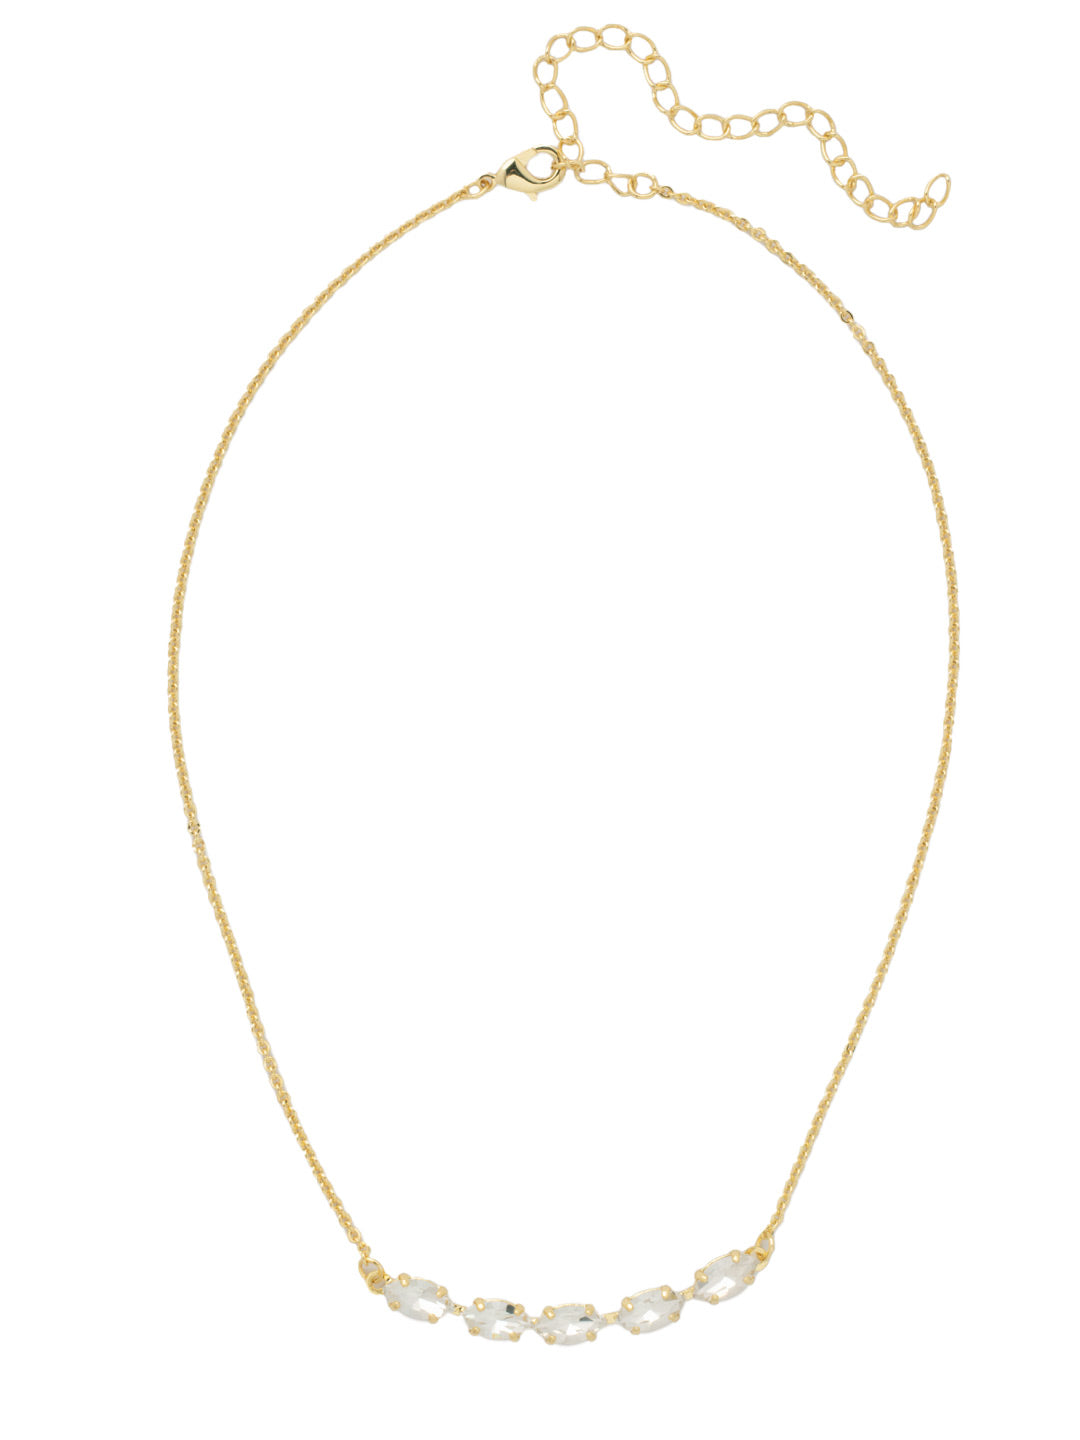 Clarissa Repeating Tennis Necklace - NFL5BGCRY - <p>The Clarissa Repeating Tennis Necklace features a row of navette cut crystals on an adjustable chain, secured with a lobster claw clasp. From Sorrelli's Crystal collection in our Bright Gold-tone finish.</p>